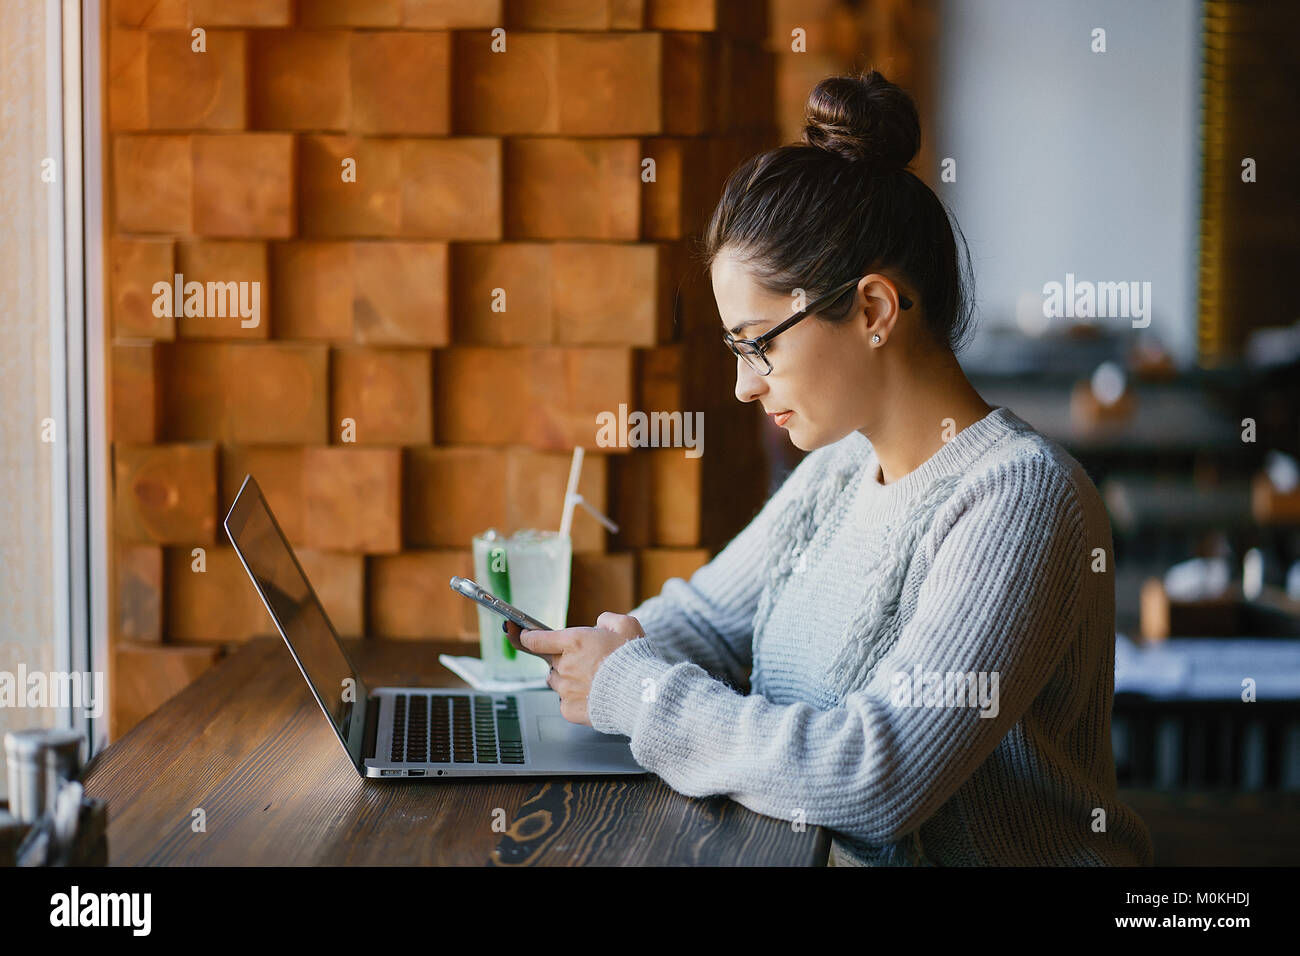 brunetter woman working on her laptop at a restaurant Stock Photo